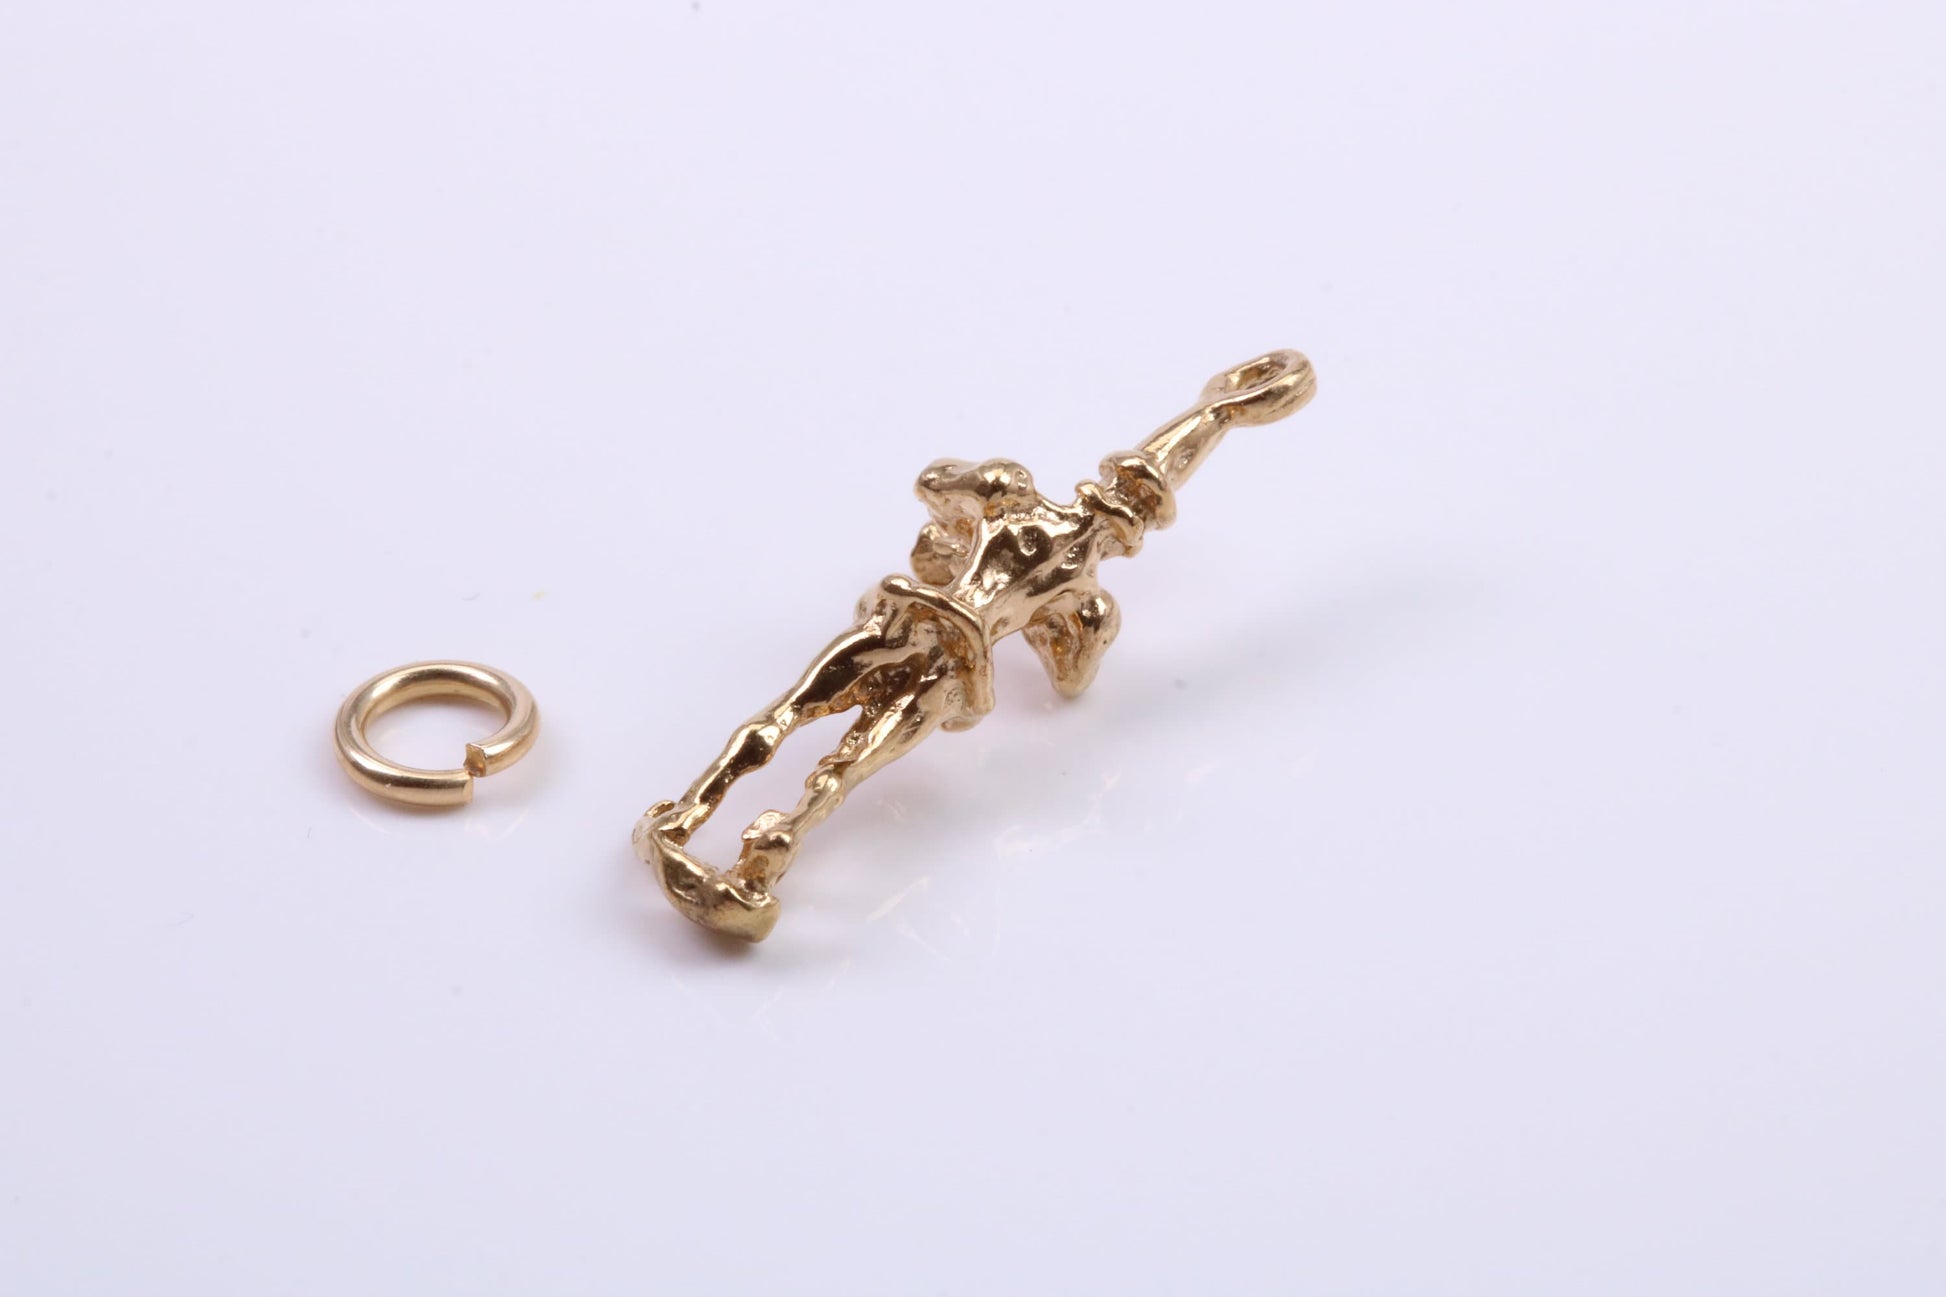 Pied Piper of Hamelin Charm, Traditional Charm, Made from Solid 9ct Yellow Gold, British Hallmarked, Complete with Attachment Link